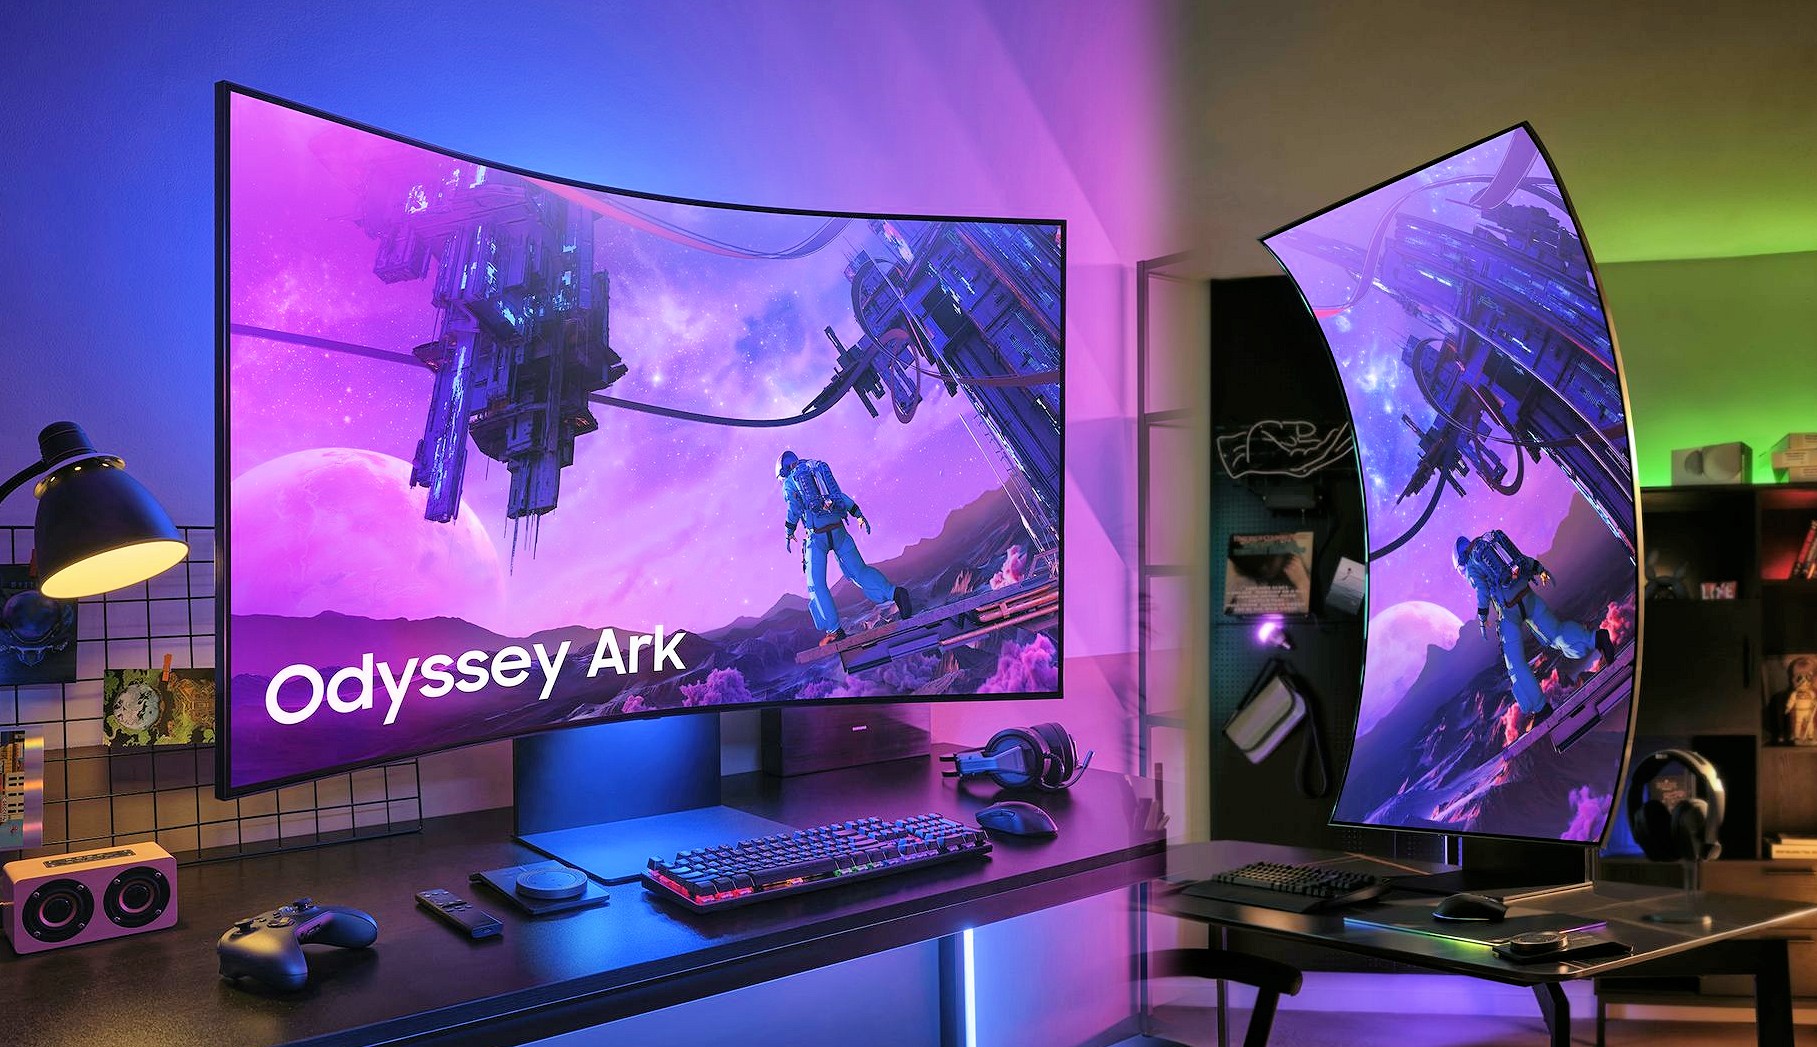 Samsung introduces Odyssey Ark, a 55-inch curved gaming display.